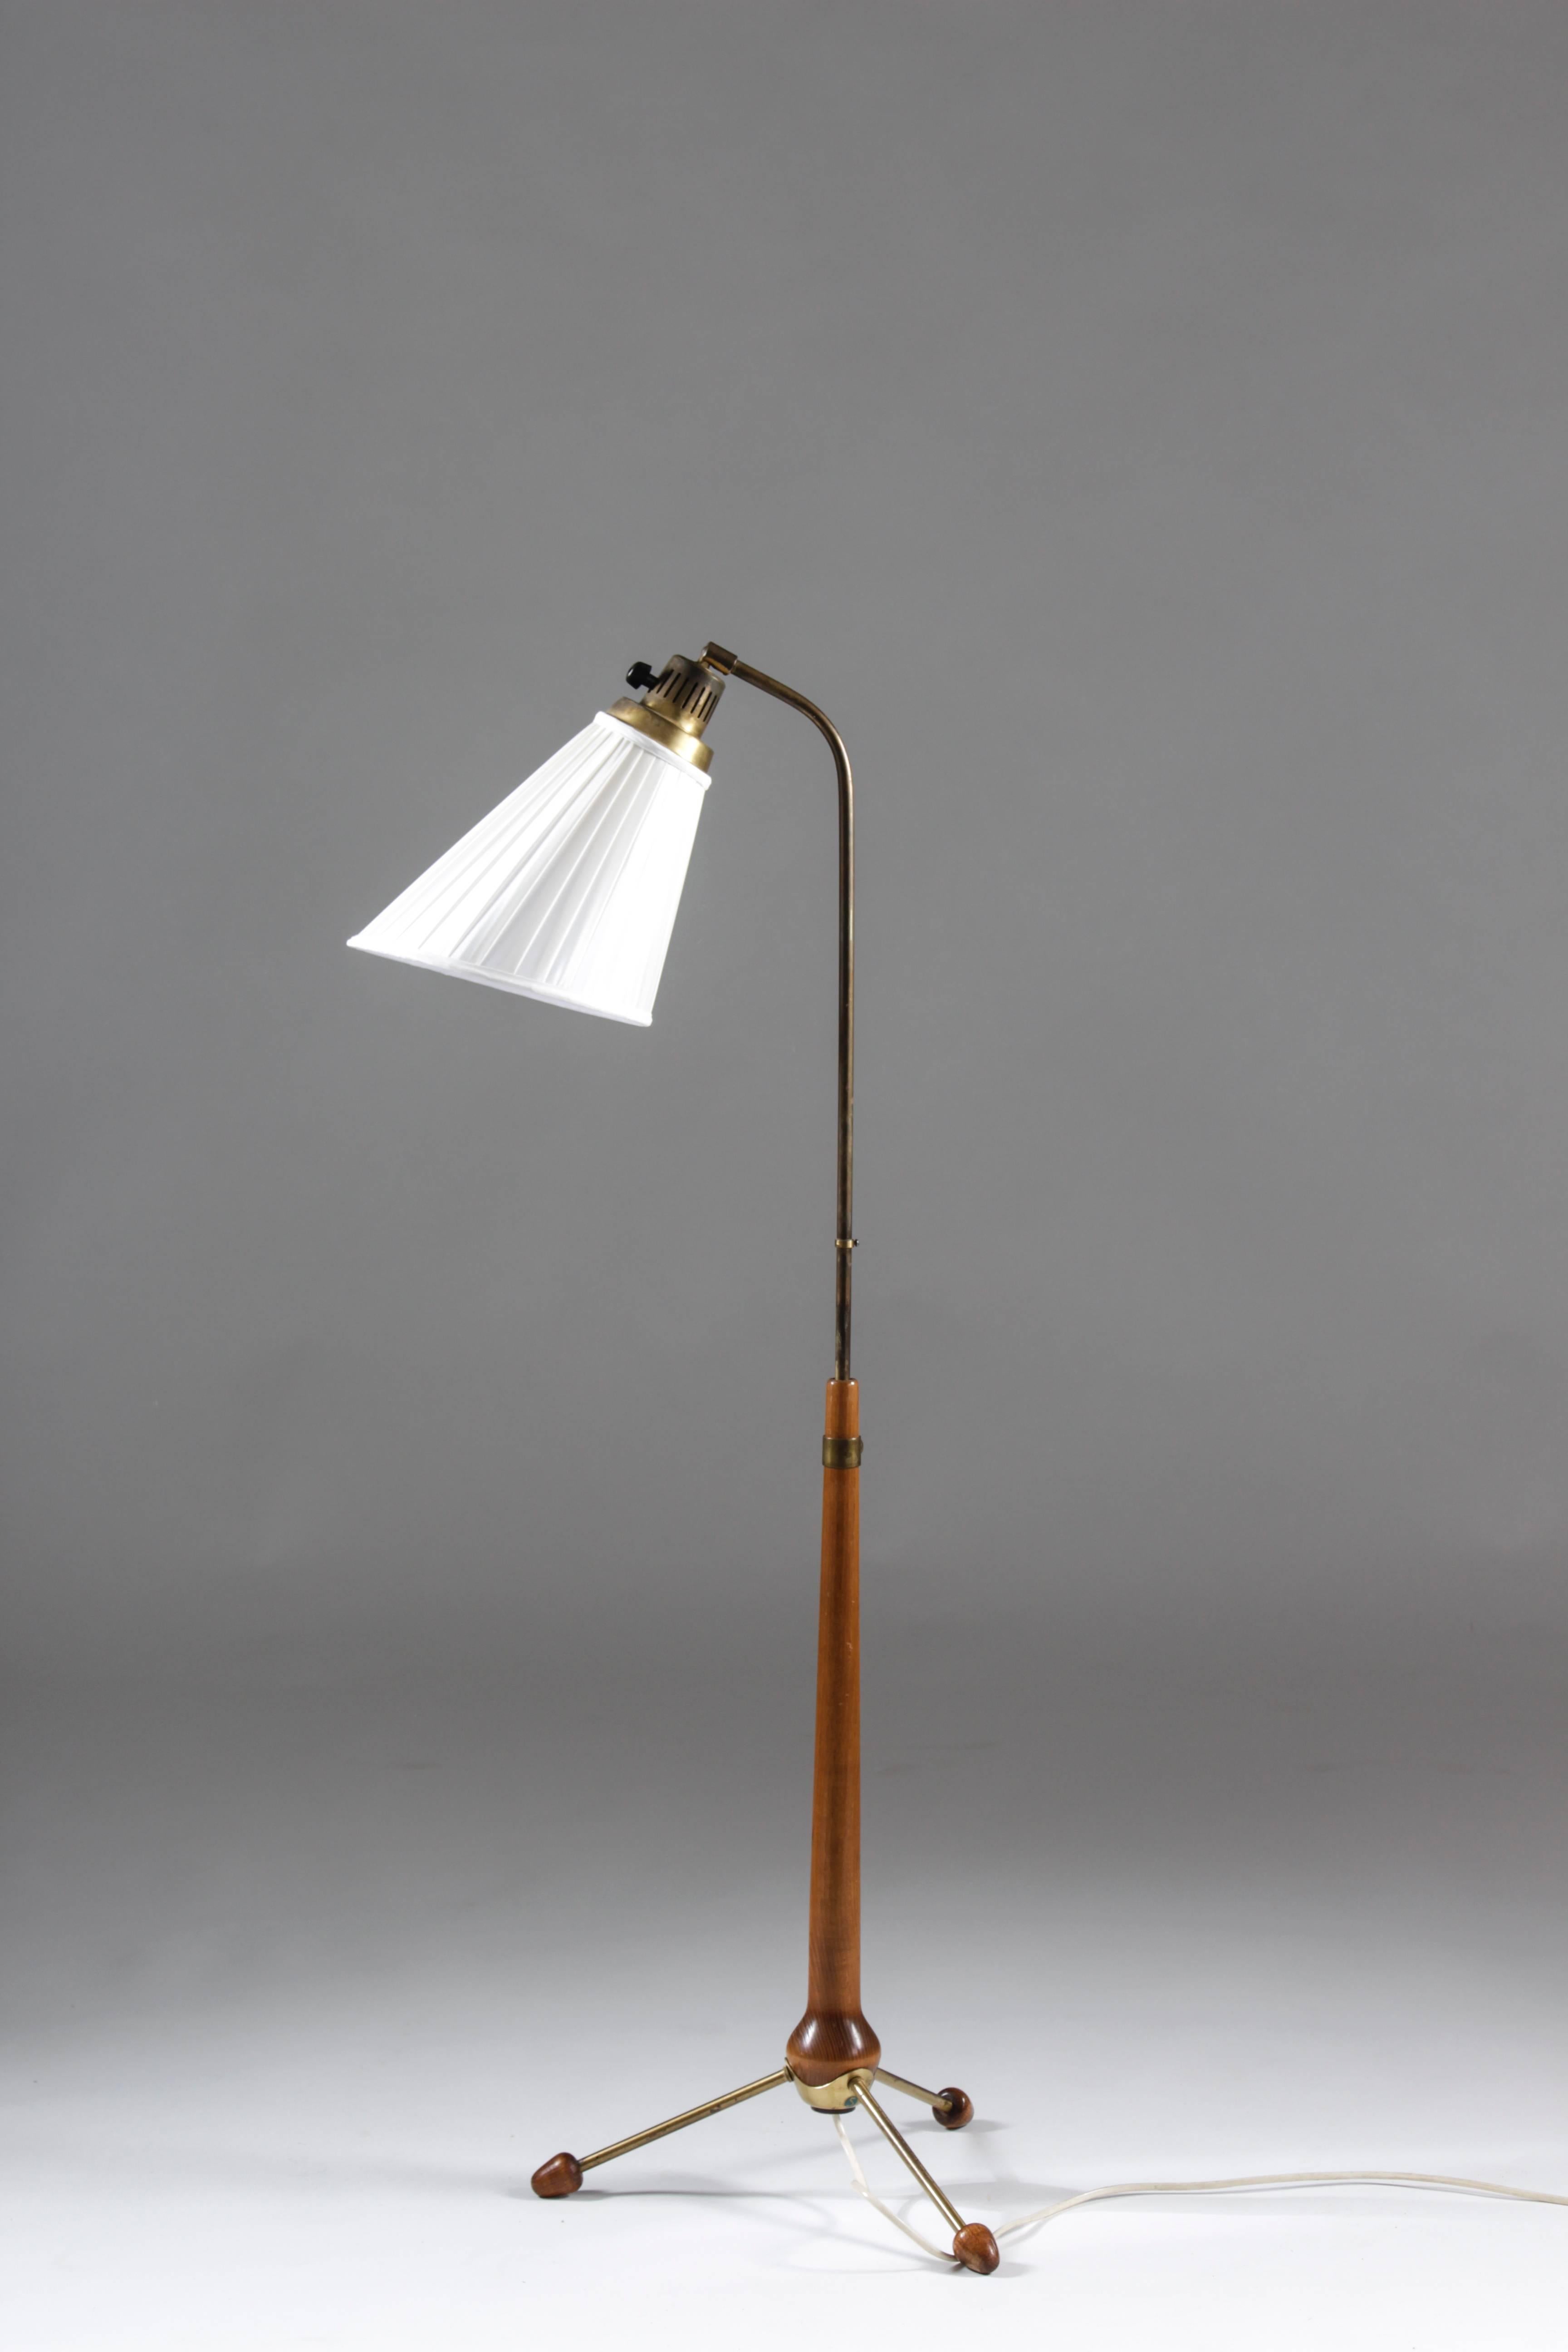 Lovely tripod floor lamp in brass and stained beech by Hans Bergström for Swedish manufacturer Ateljé Lyktan. The brass parts show a perfect patina and the wood is in excellent condition. The height of the lamp is adjustable. All parts are original